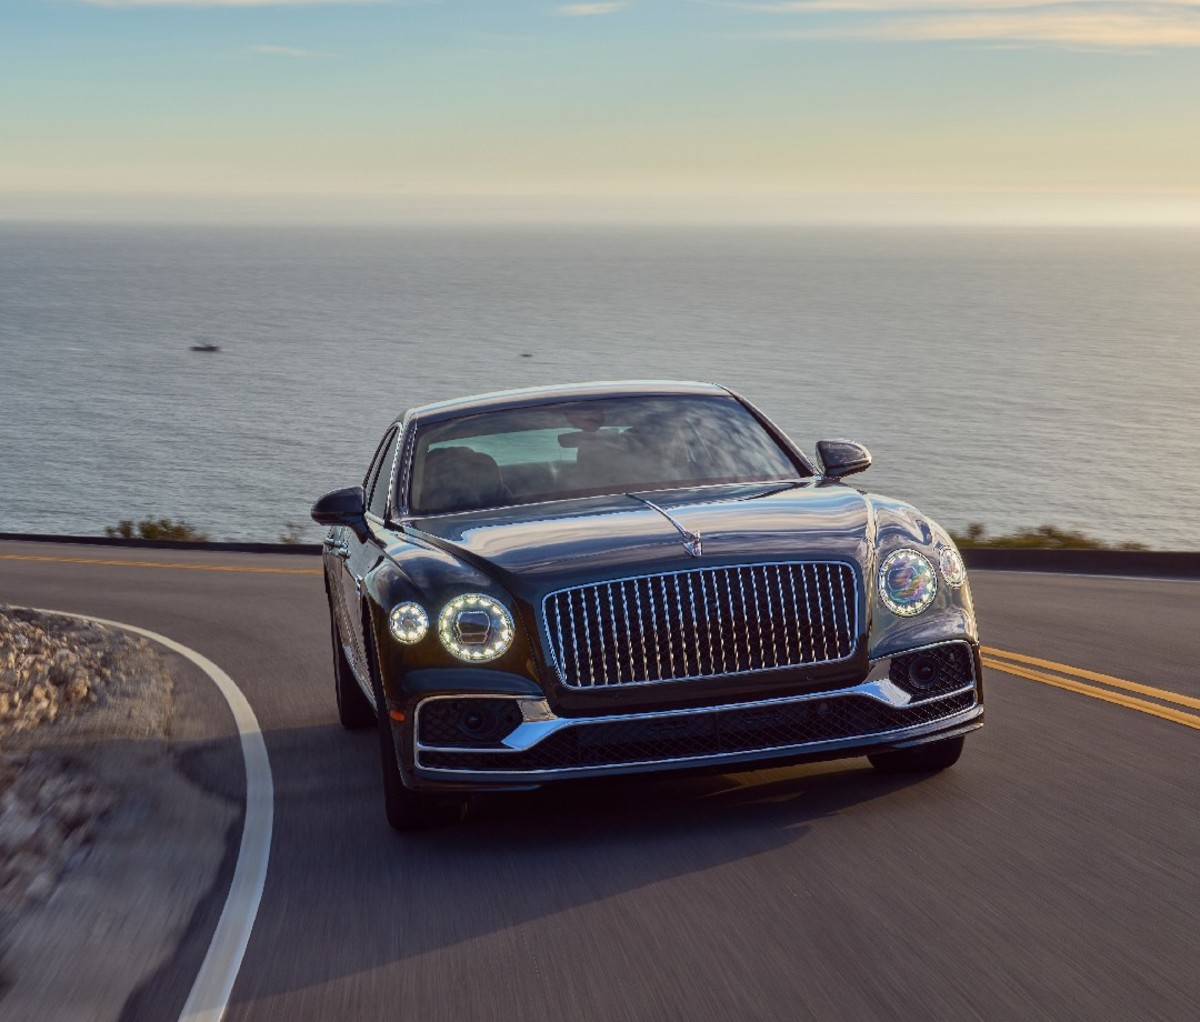 Black 2022 Bentley Flying Spur Hybrid driving a curved road with ocean in the background, front view